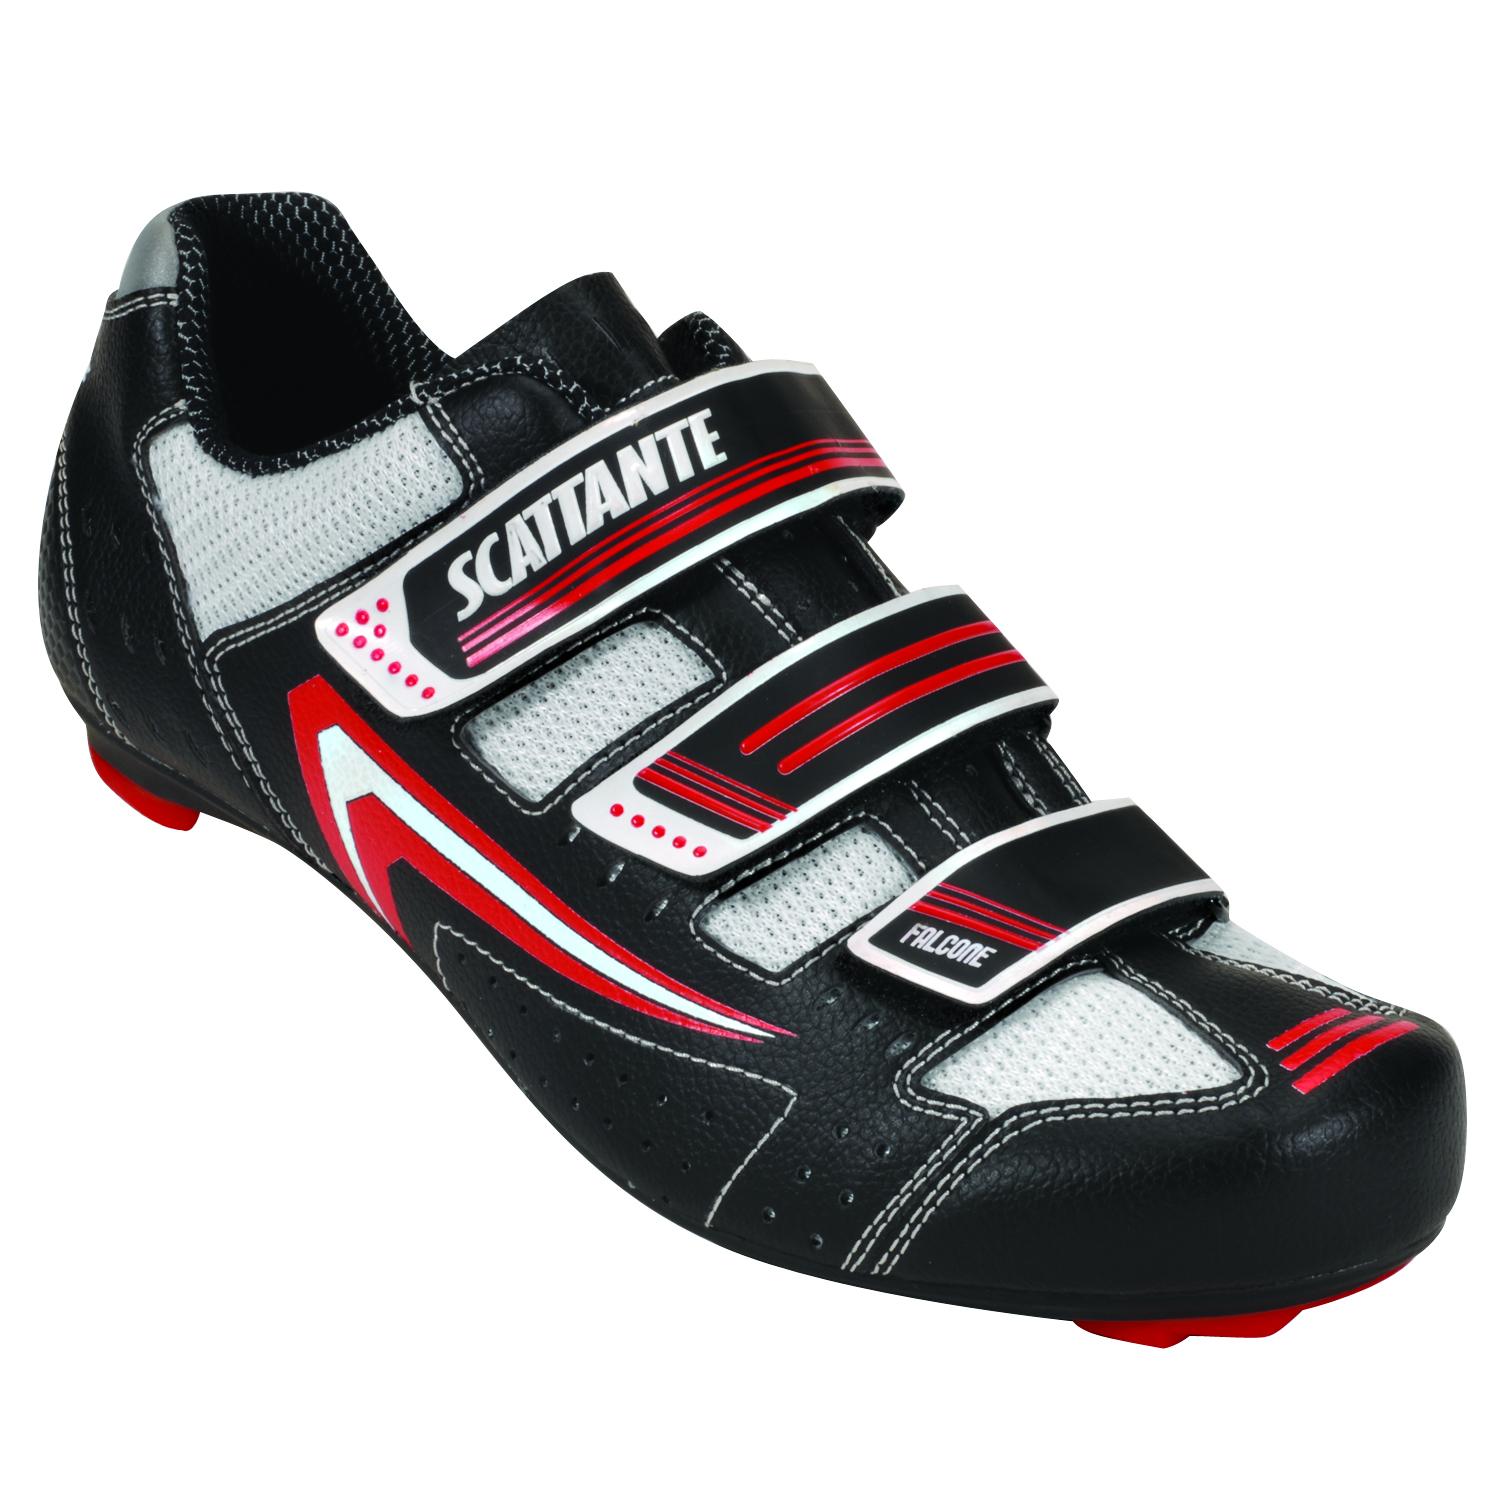 scattante cycling shoes